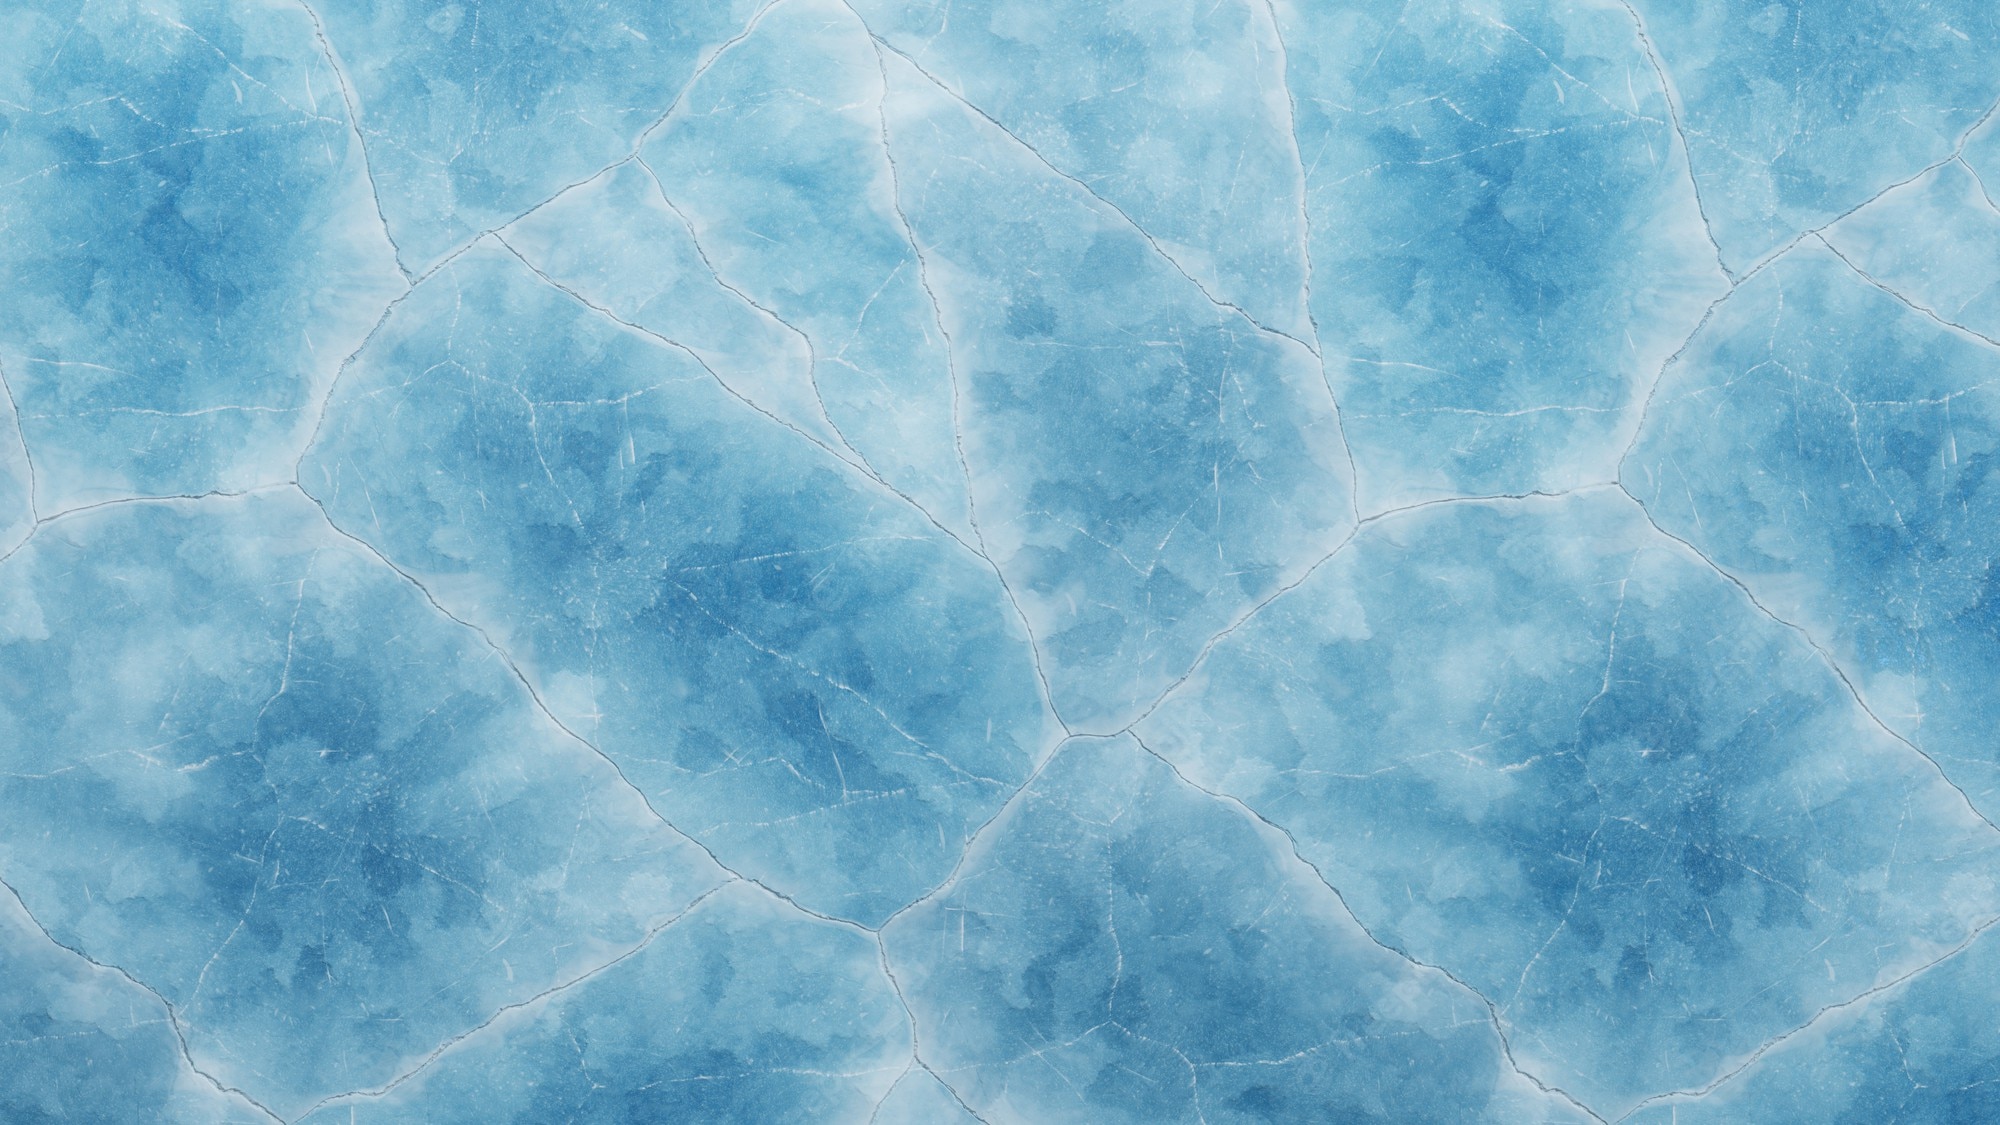 Premium Photok high resolution cracked ice texture wallpaper background realistic 3D rendering 102